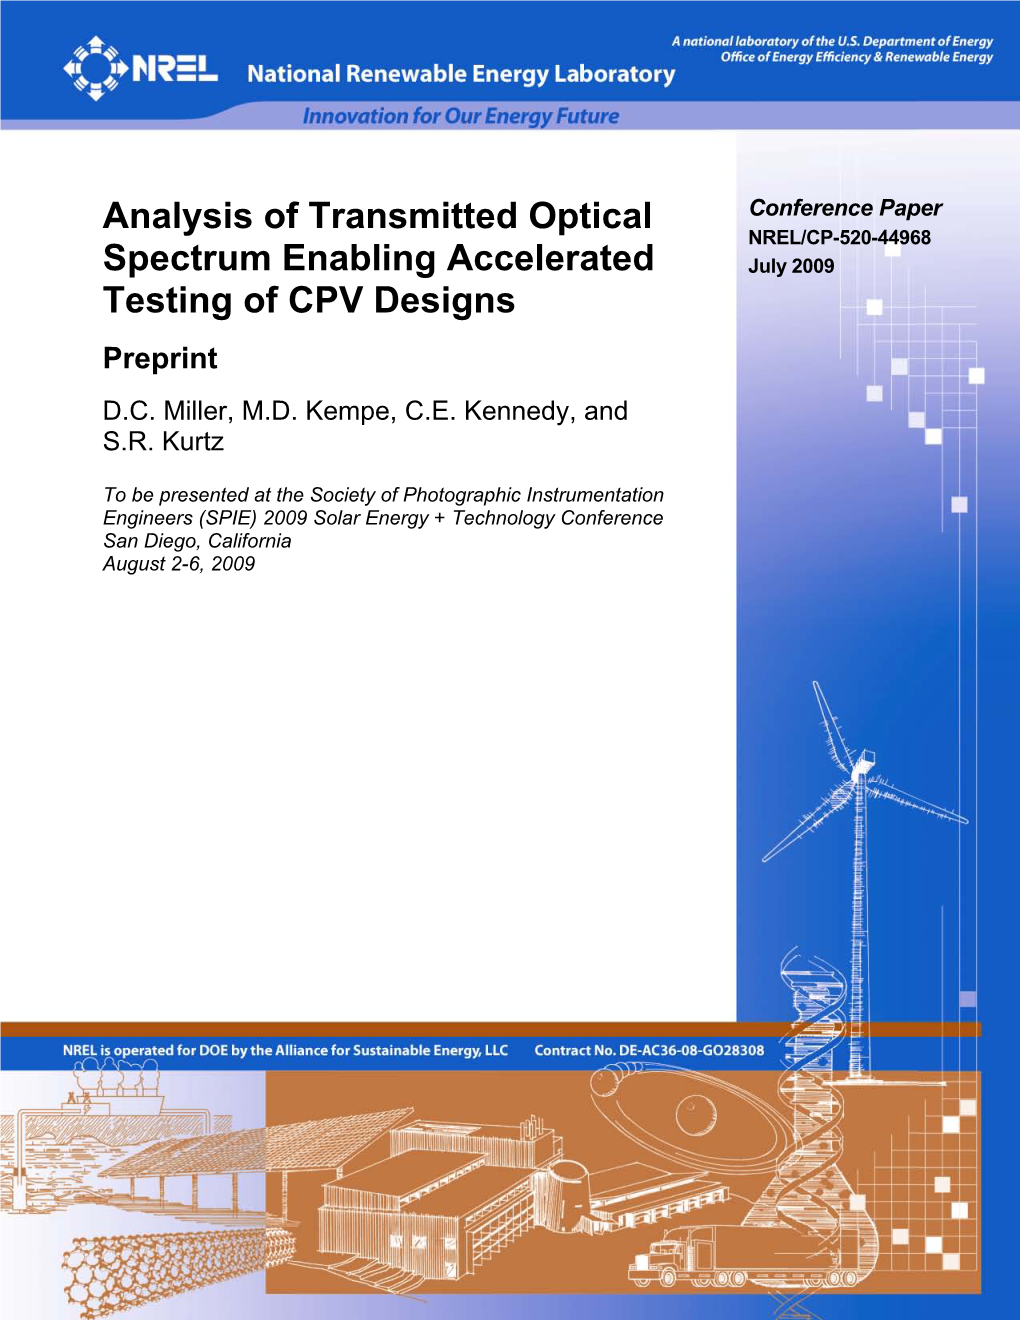 Analysis of Transmitted Optical Spectrum Enabling Accelerated Testing of CPV Designs